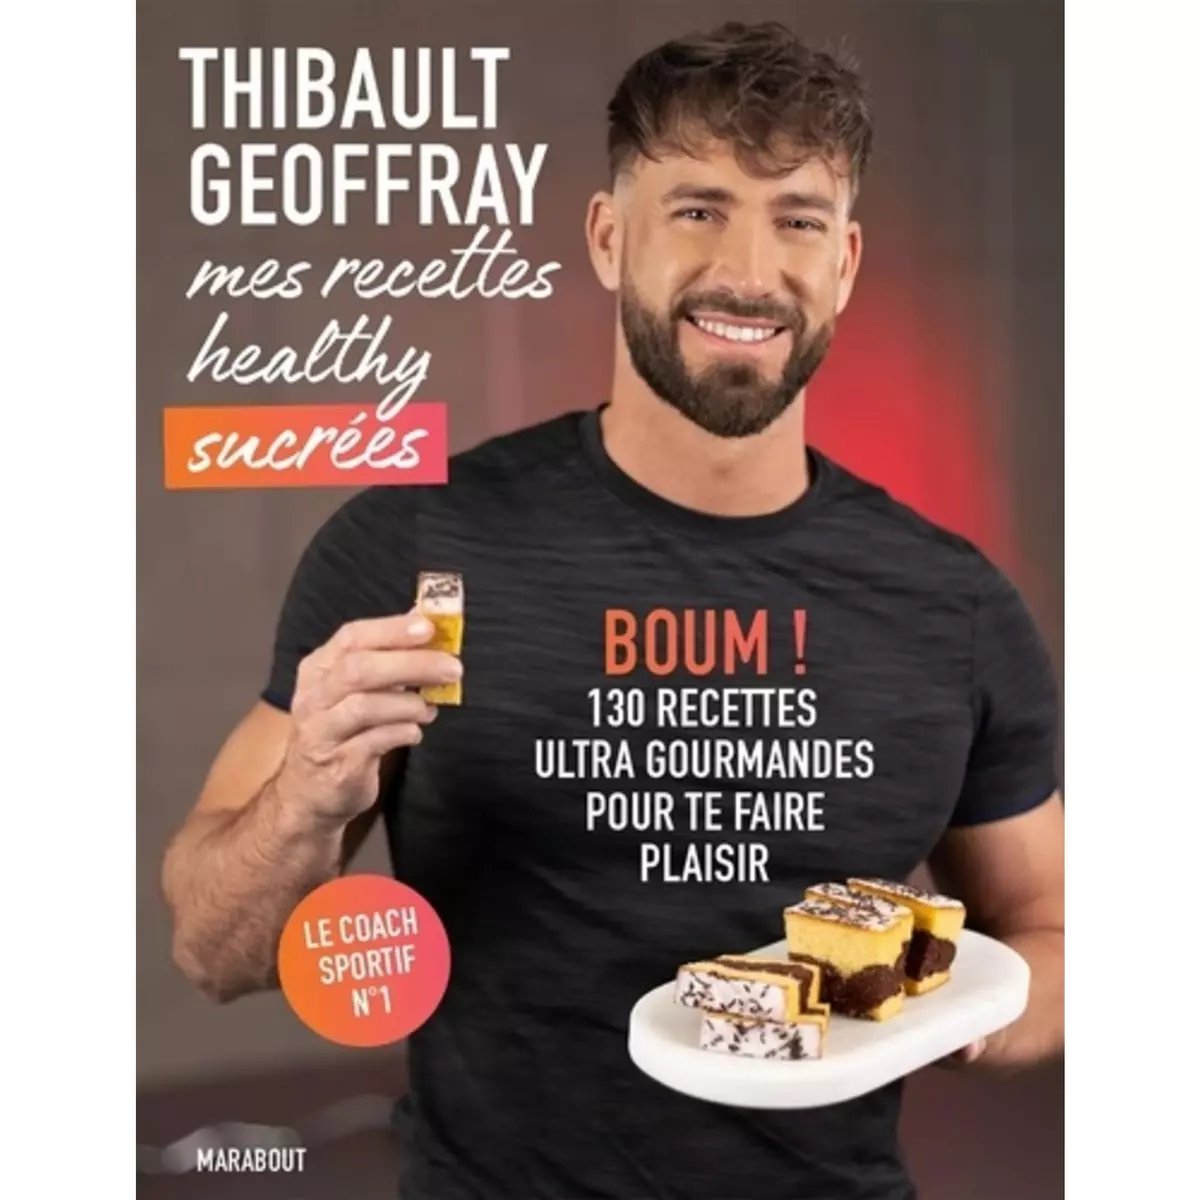  MES RECETTES HEALTHY SUCREES, Geoffray Thibault